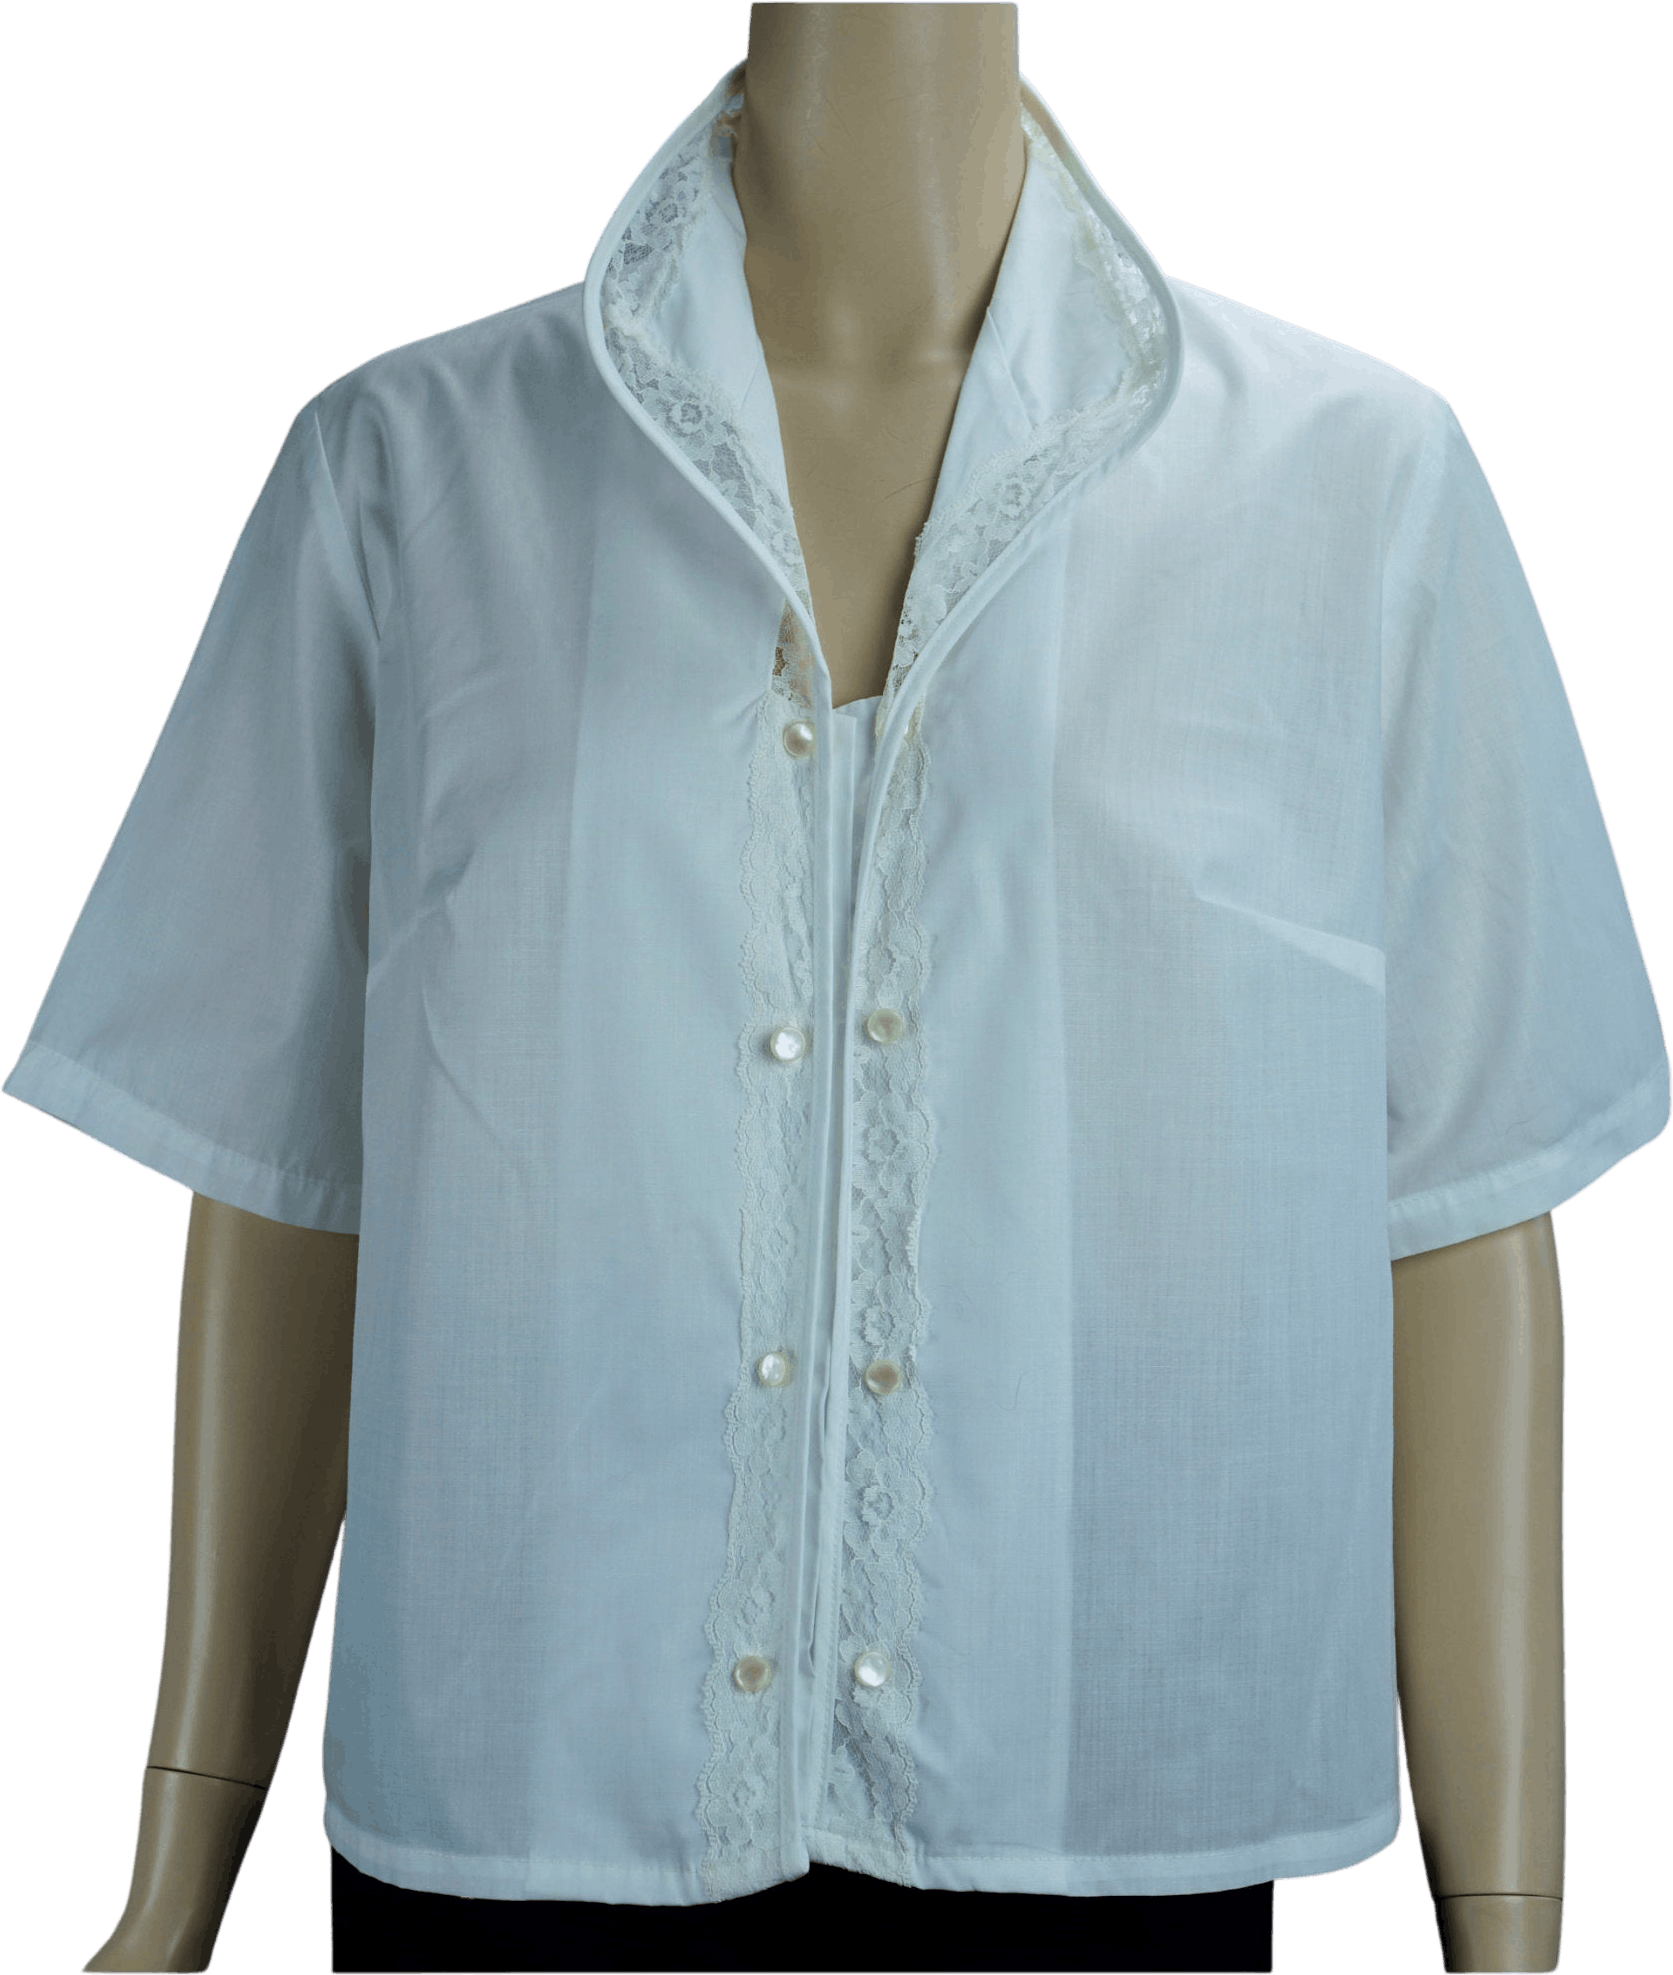 Vintage Lace Trimmed White Blouse by Loomtex | Shop THRILLING